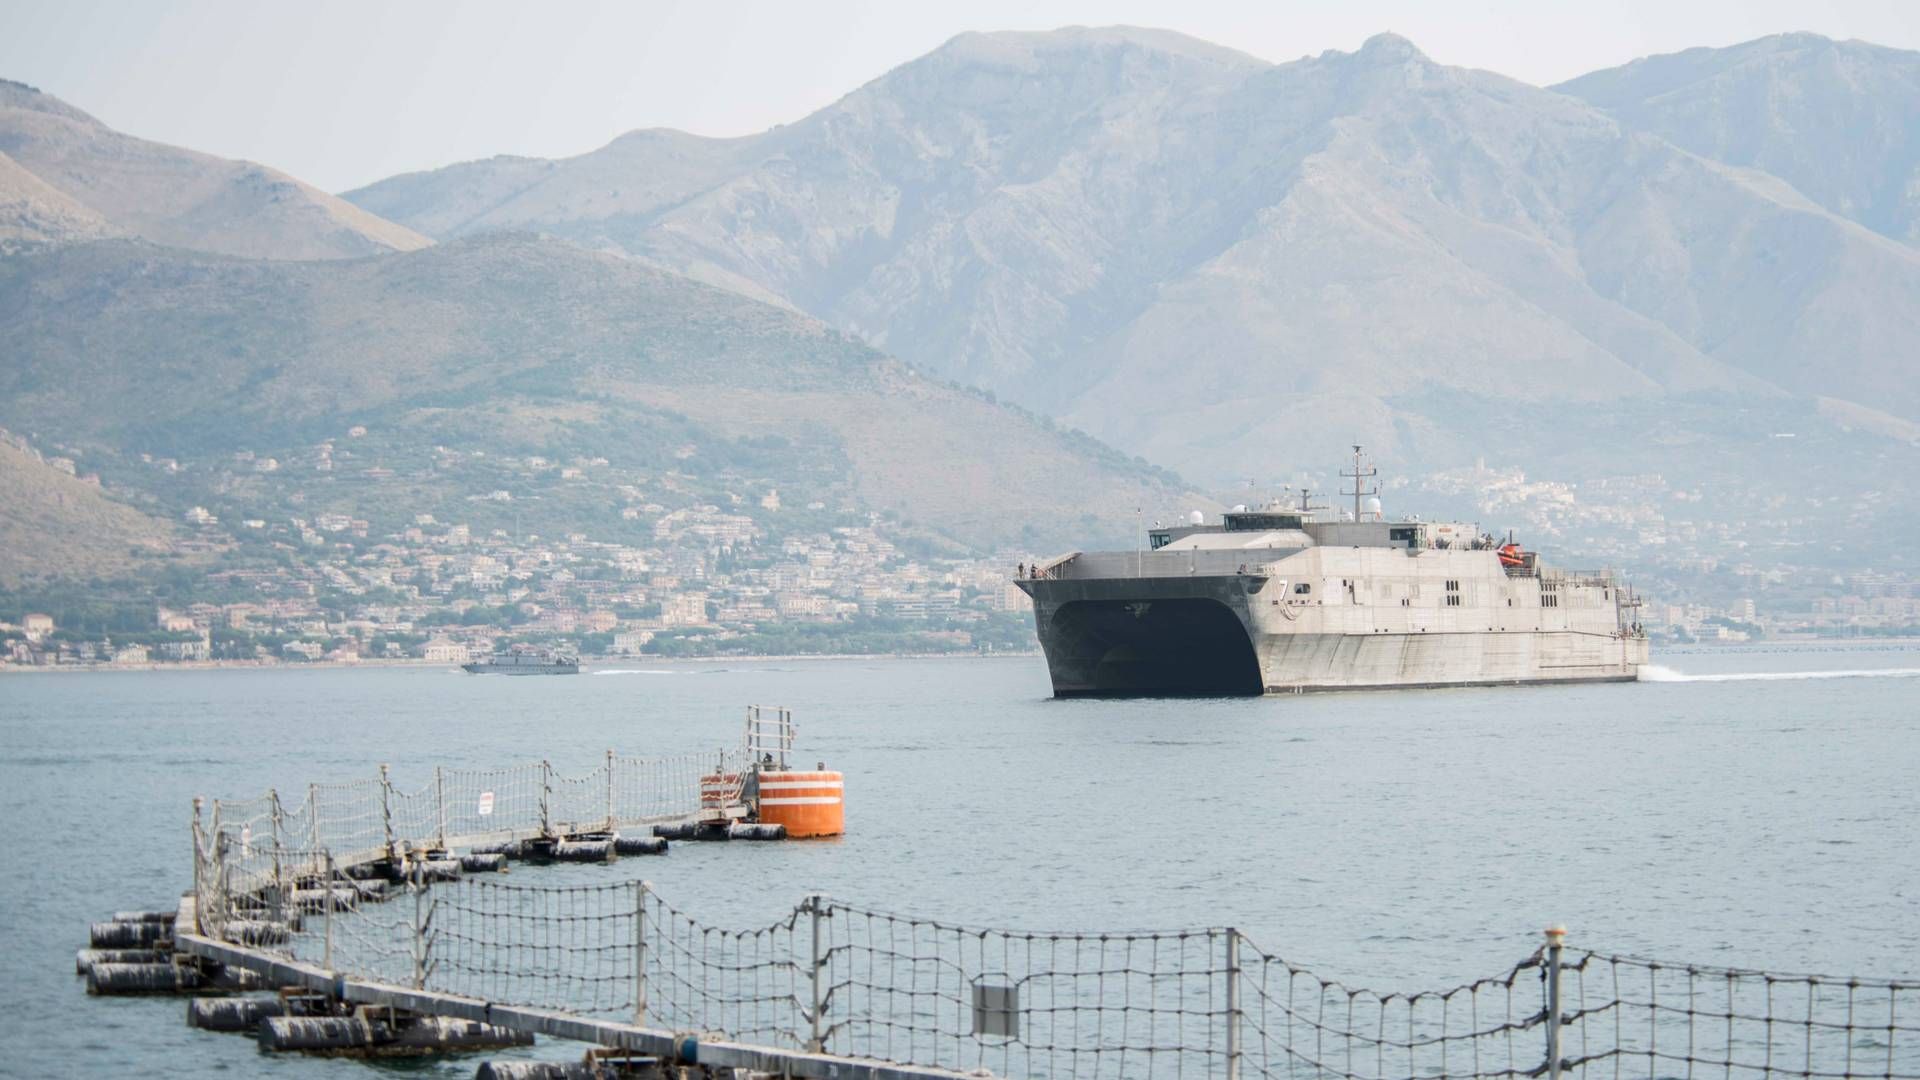 The USNS Carson City, where the alleged assault took place, in an unrelated location. | Photo: U.s. Navy photo by Mass Communication Specialist 2nd Class Donavan K. Patubo